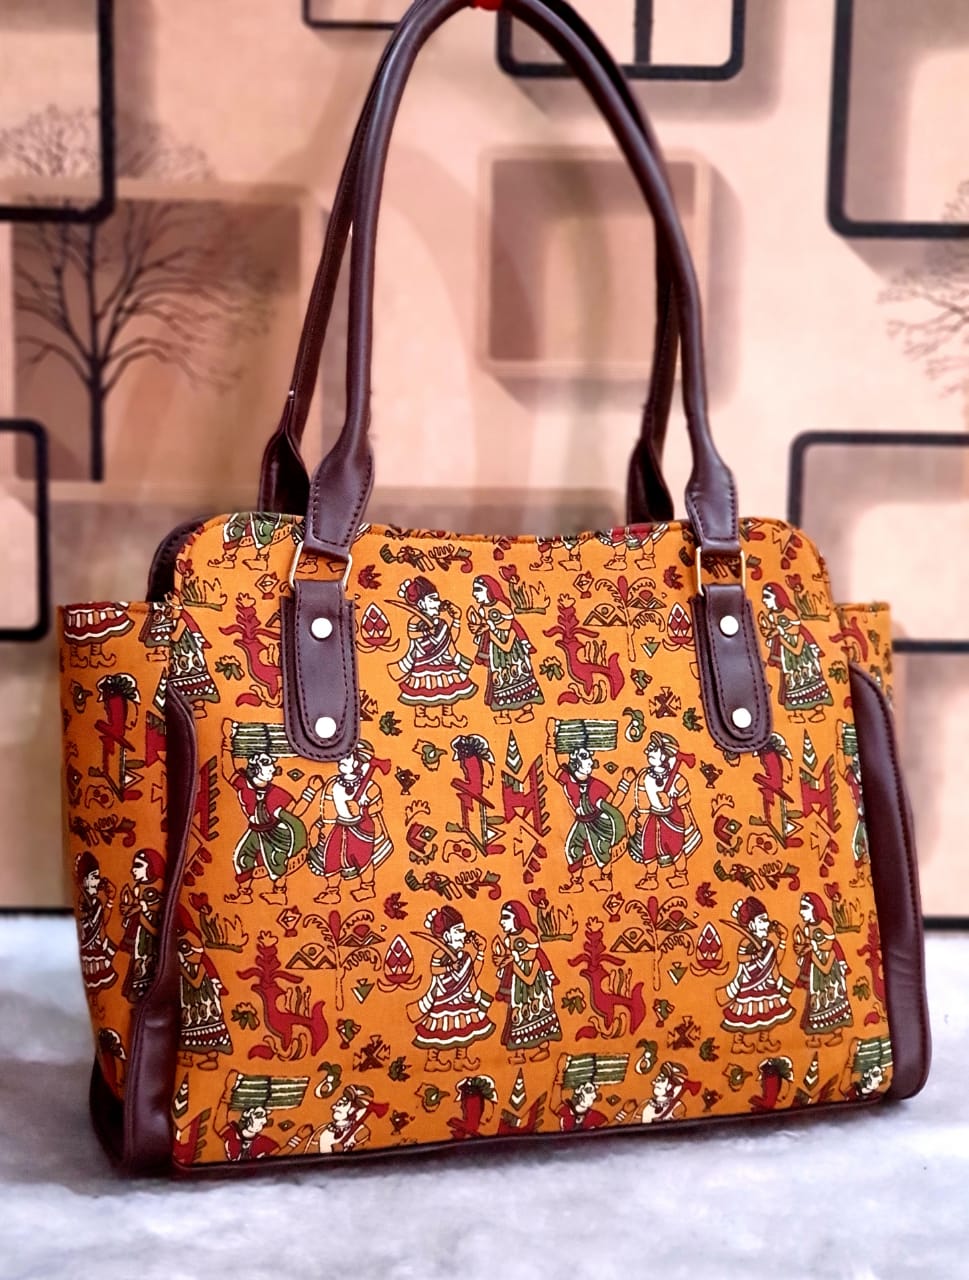 Rajasthani Hand Bags - Colourful Embroidered Elephant - WL1996 - WL1996 at  Rs 265.00 | Gifts for all occasions by Wedtree